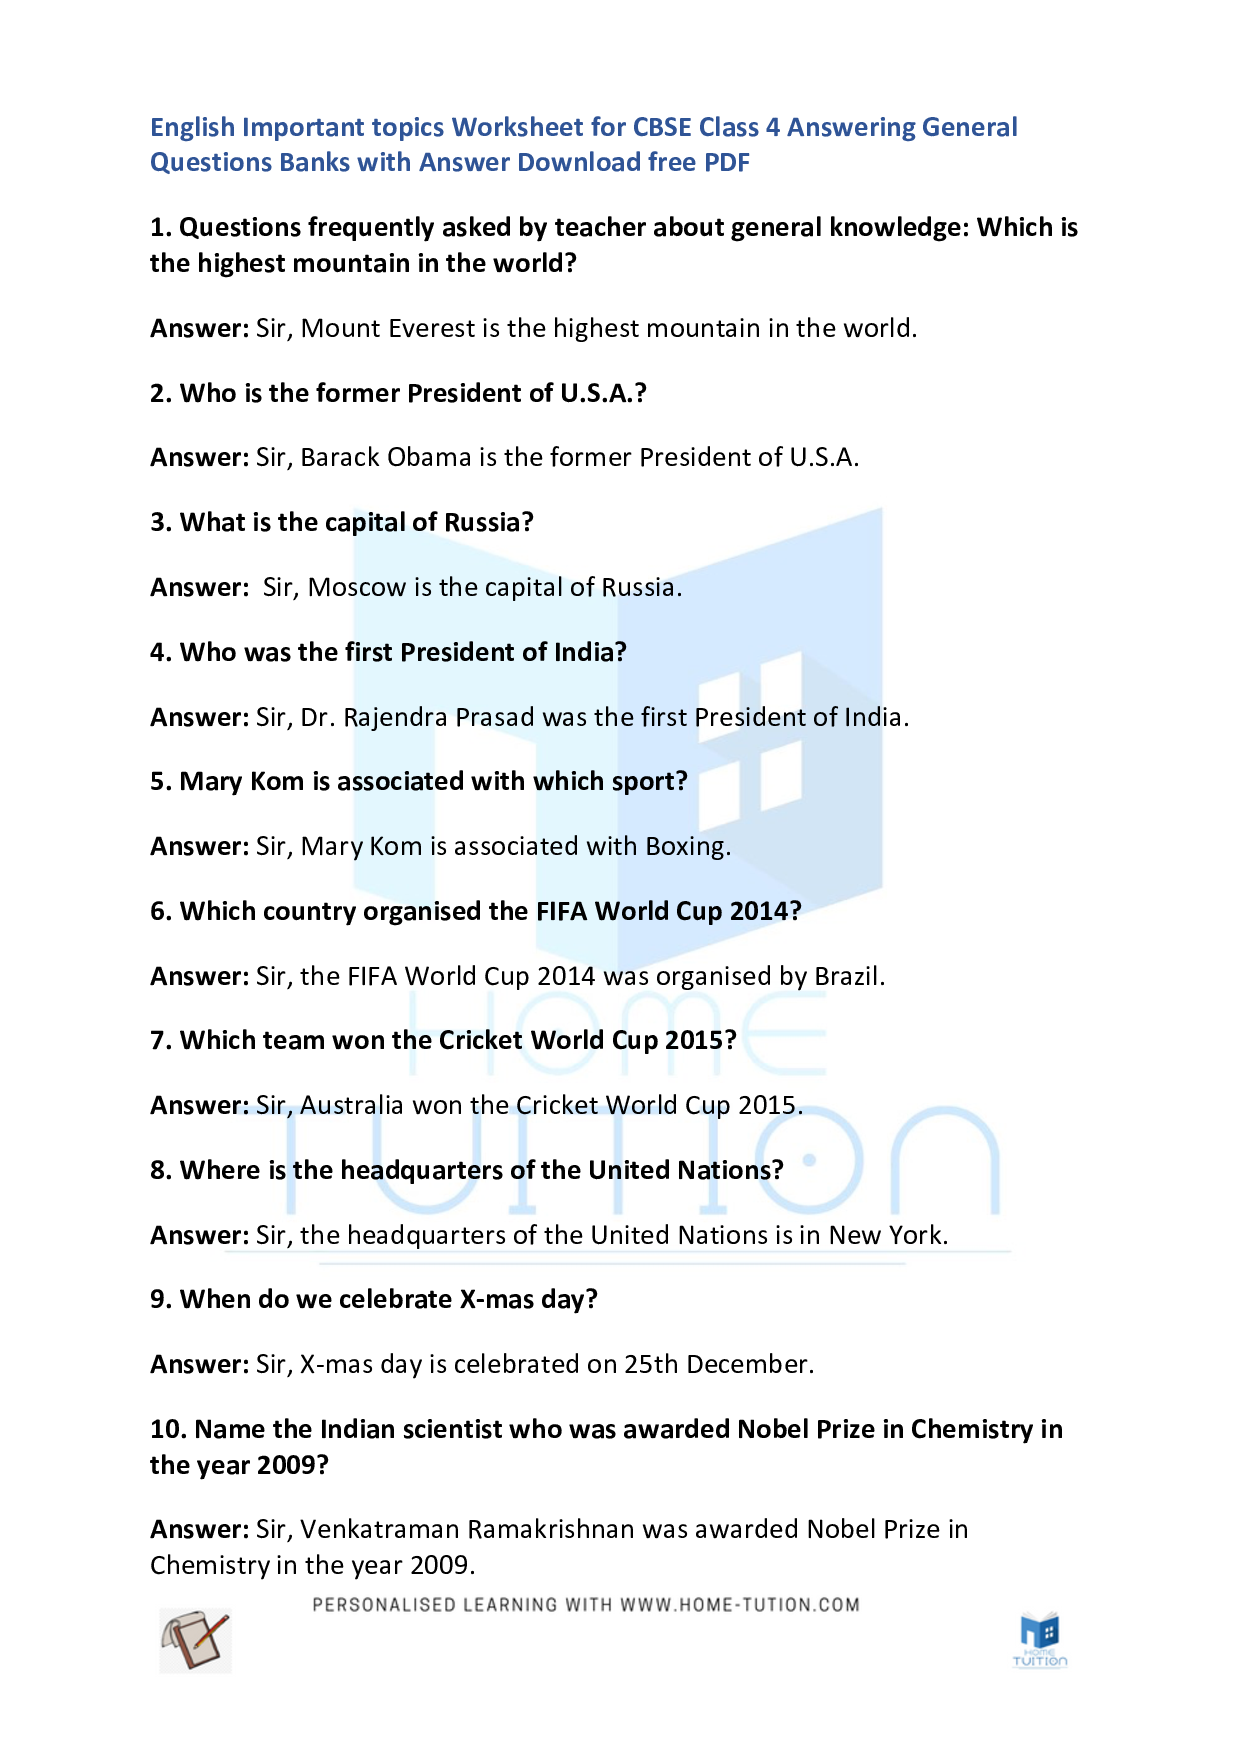 CBSE NCERT Class 4 English Answering General Questions Worksheet with Answers PDF